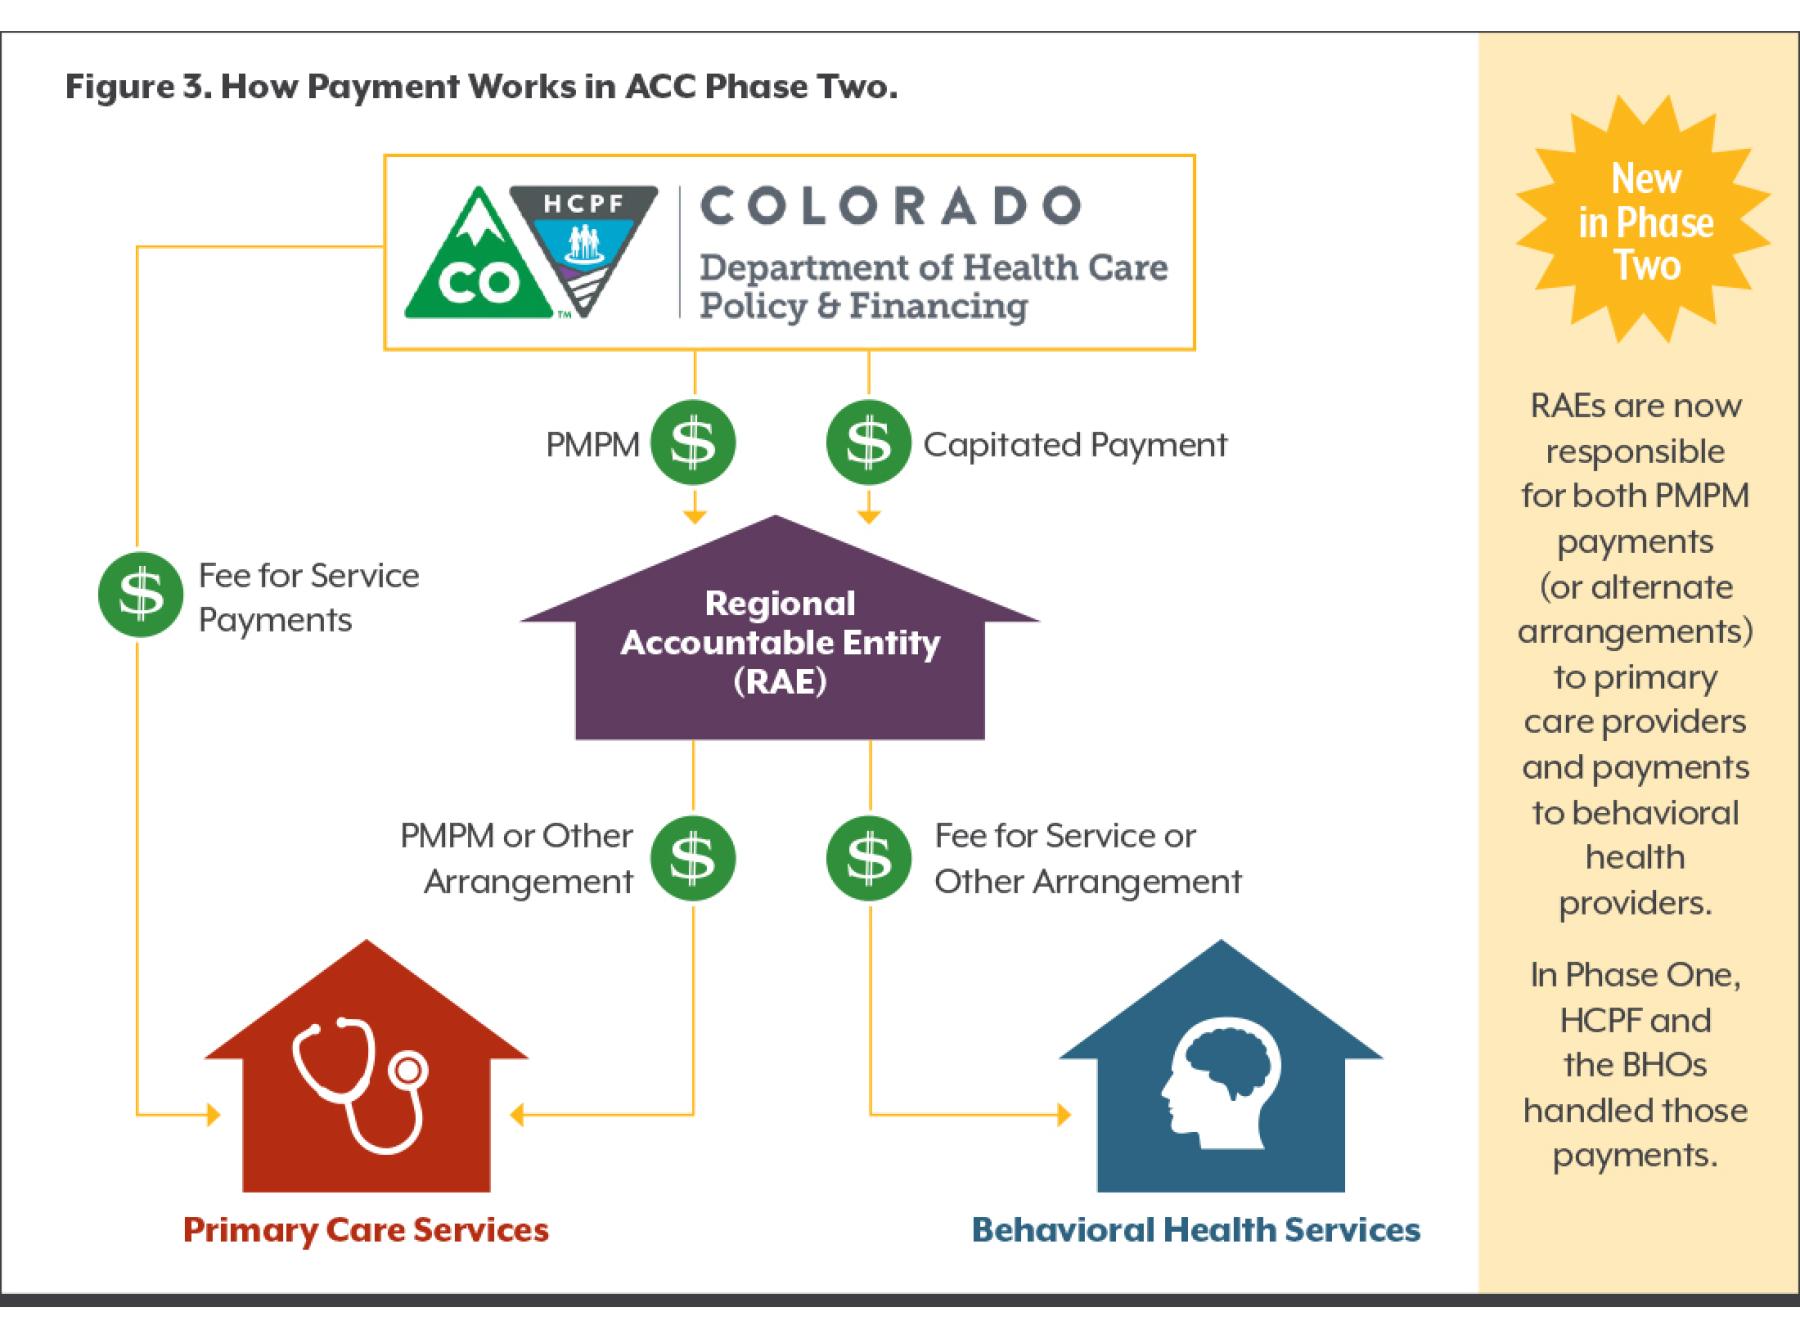 A graphic showing how funds flow from HCPF through the RAEs, then to primary care or behavioral health providers..